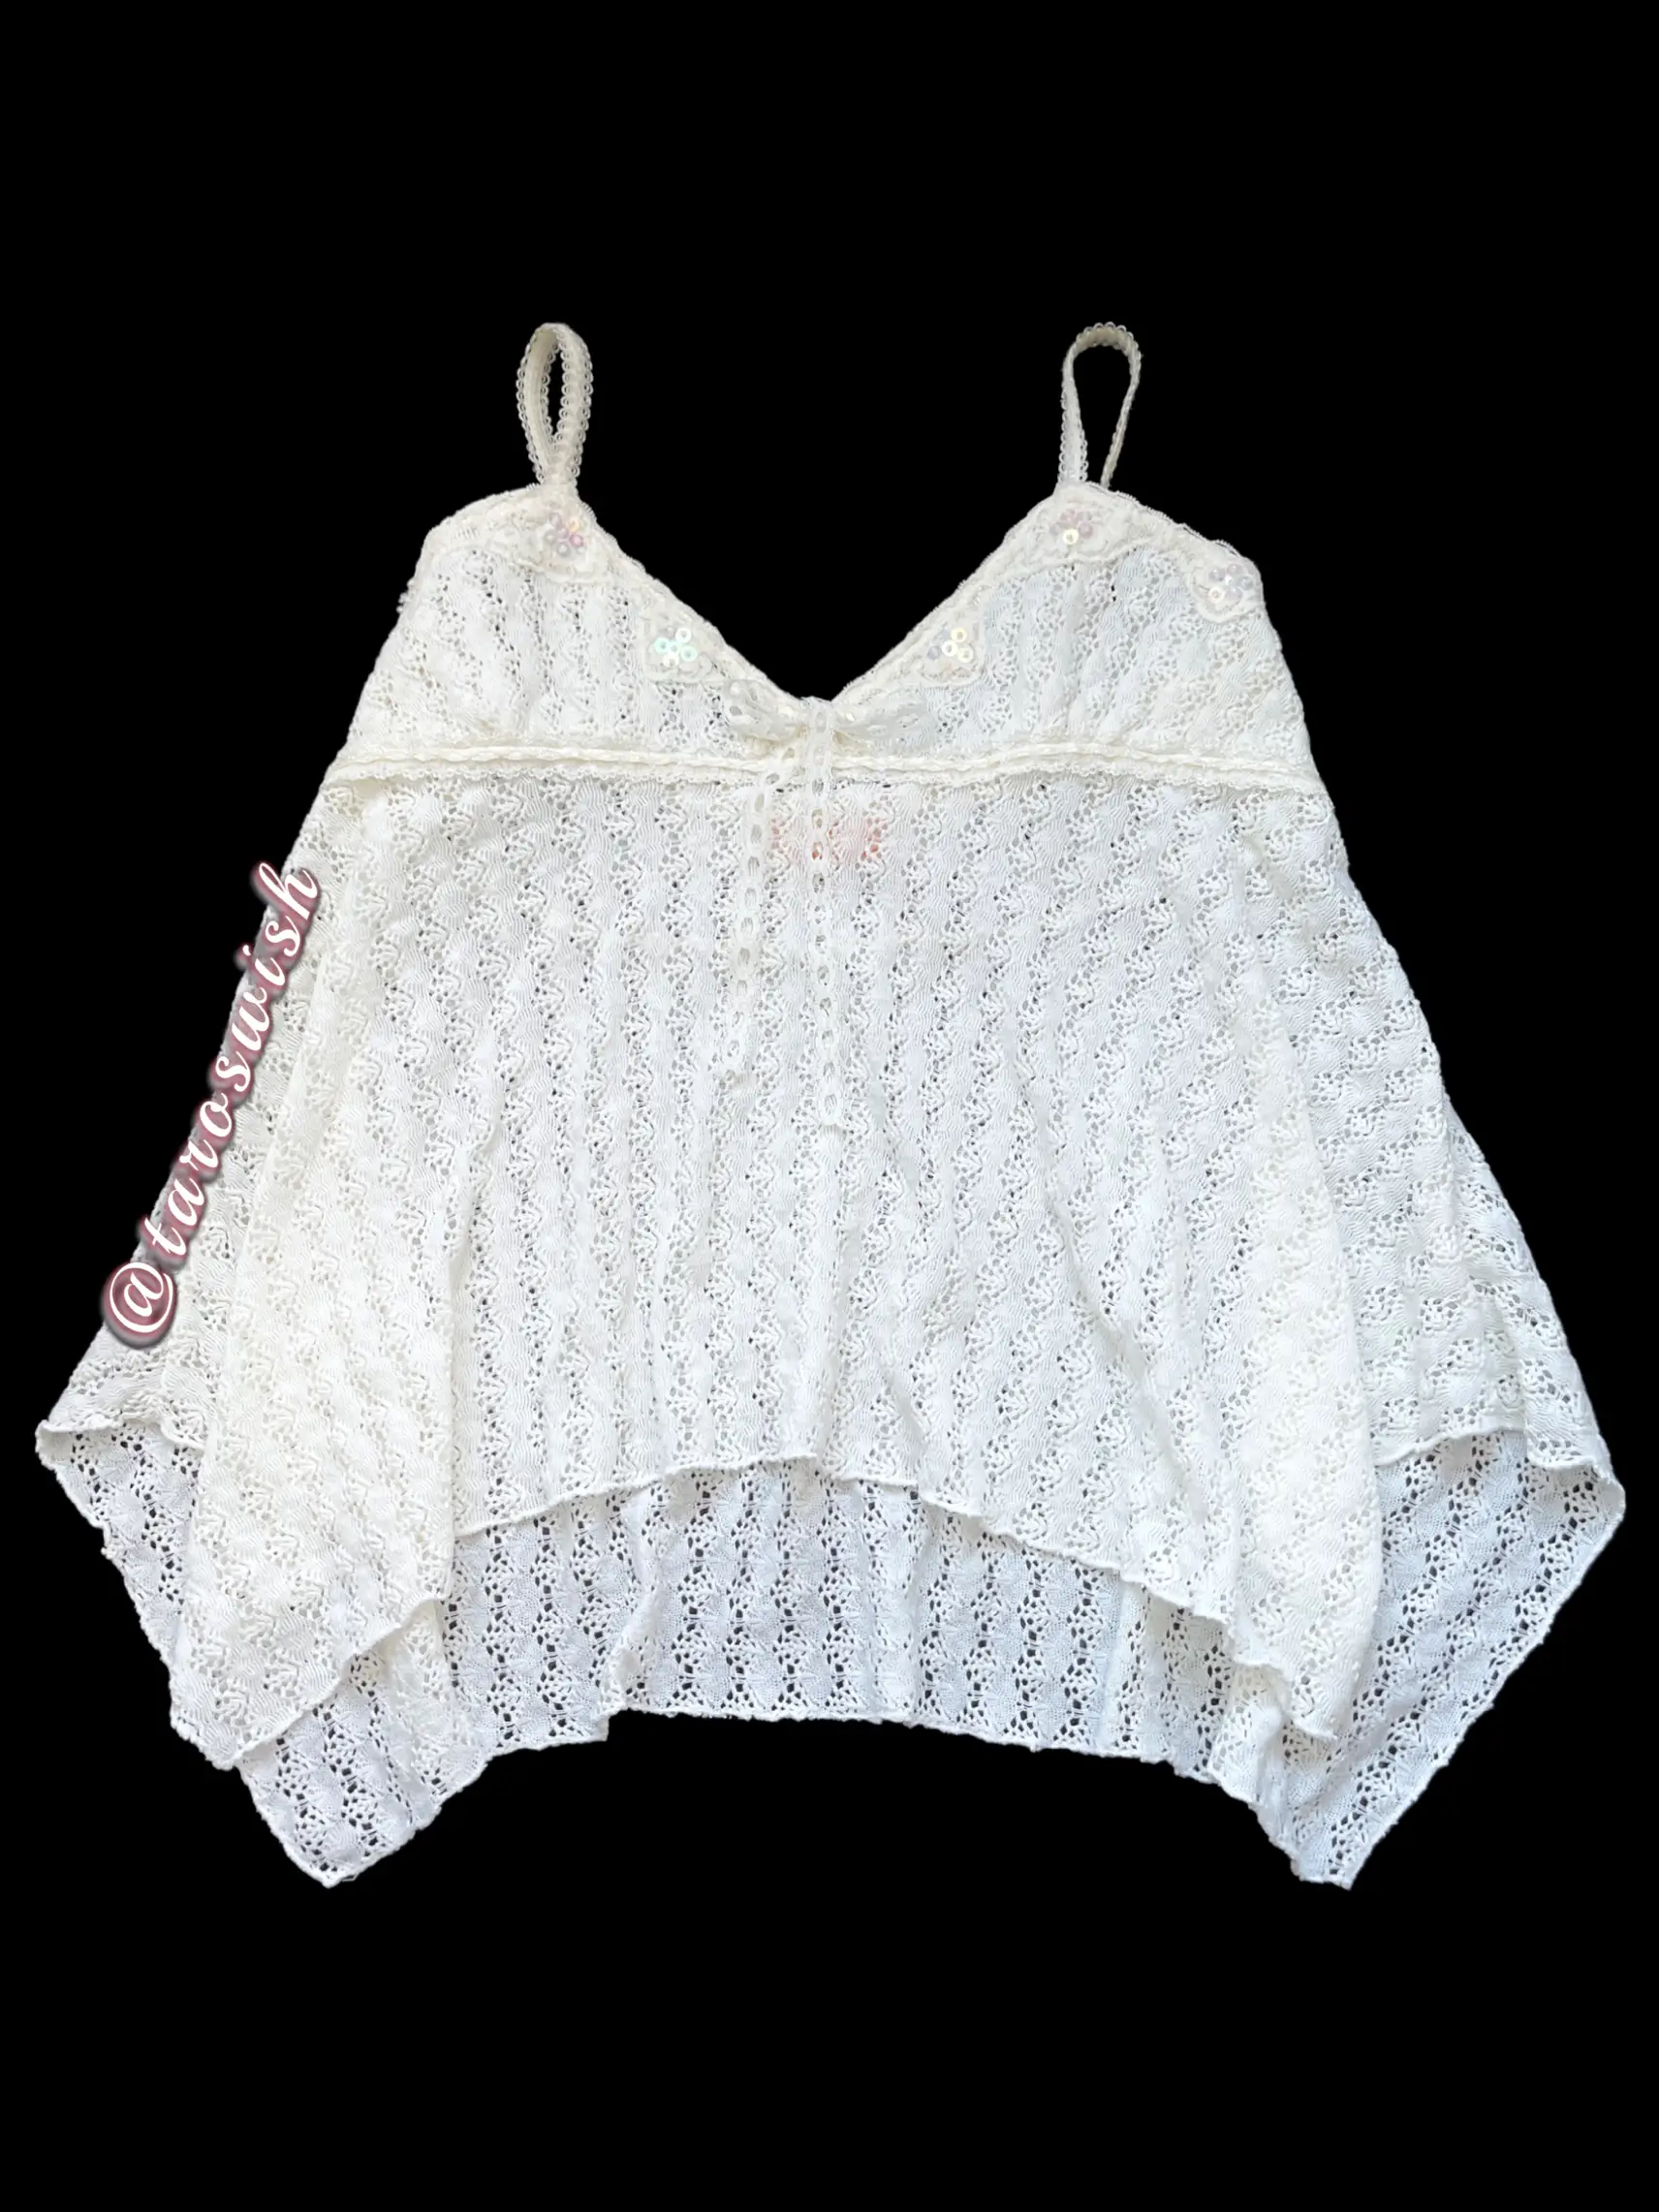 Aesthetic Clothes Dollette Top - Lace Crop Tank Top Ribbons